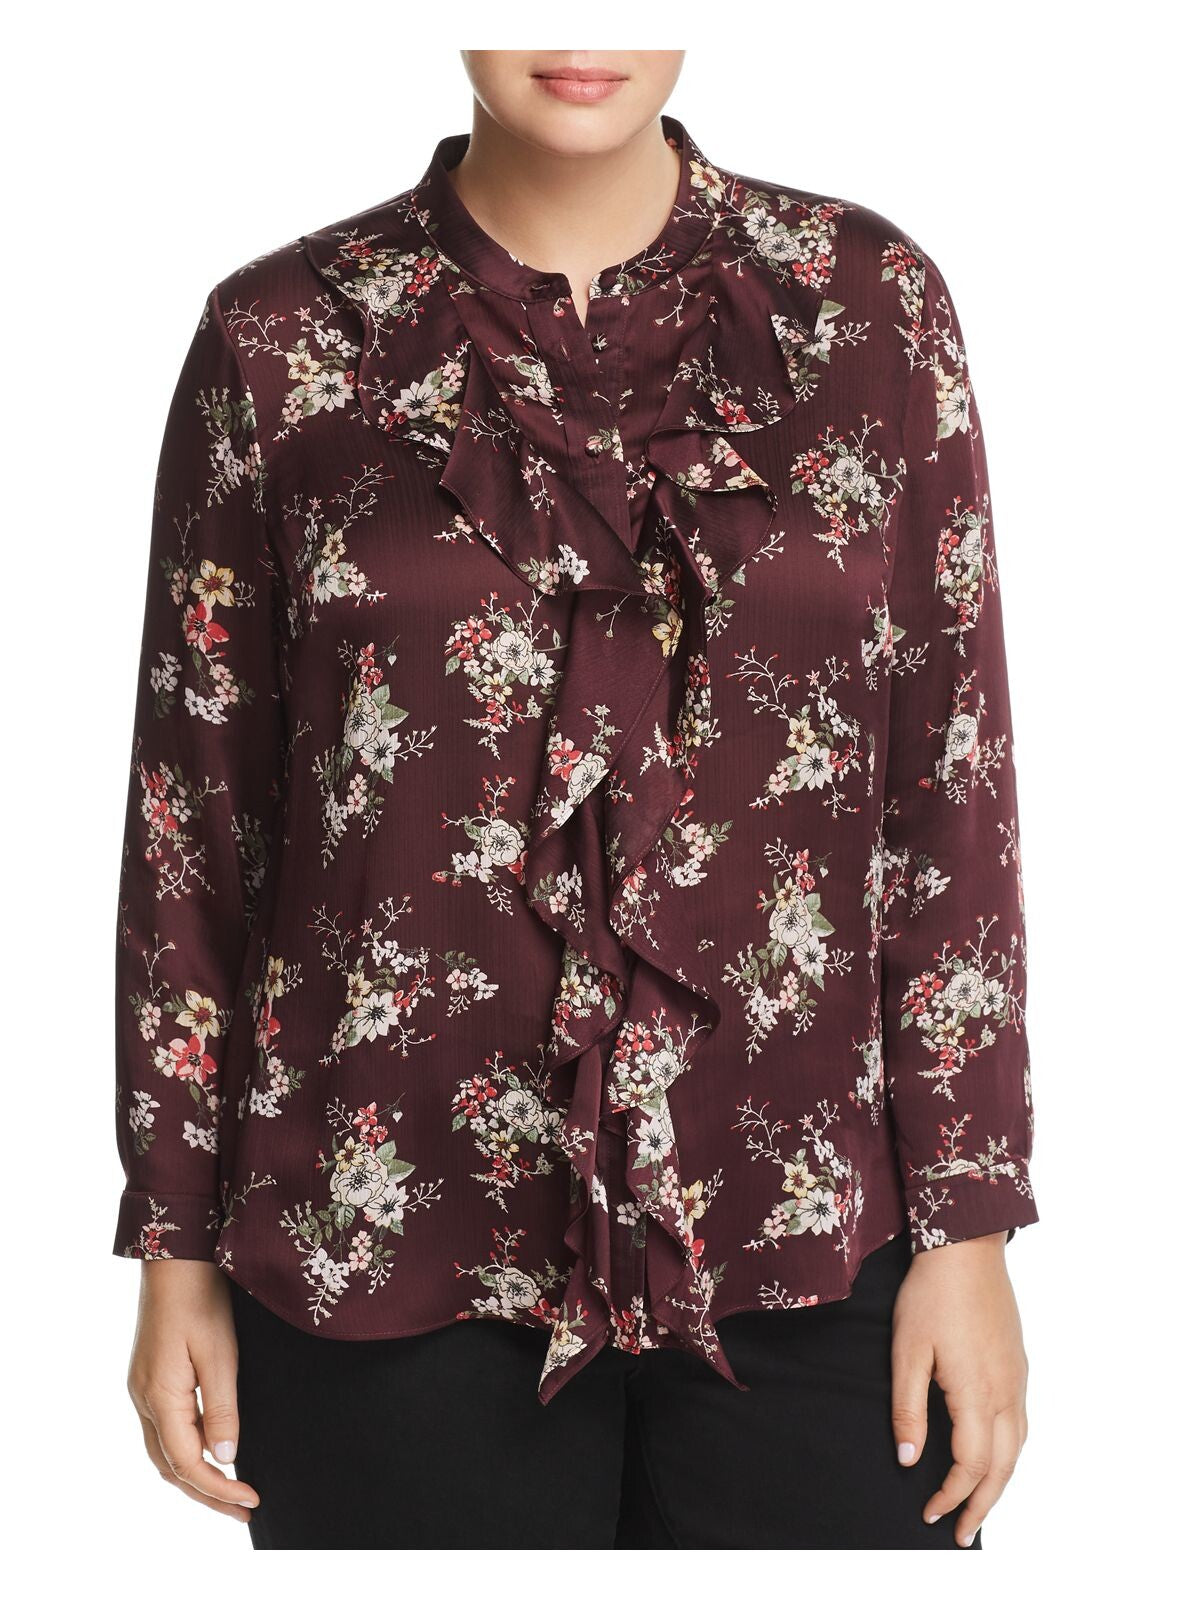 VINCE CAMUTO Womens Maroon Ruffled Band Collar Button Up Curved Hem Floral Long Sleeve Wear To Work Blouse Plus 3X